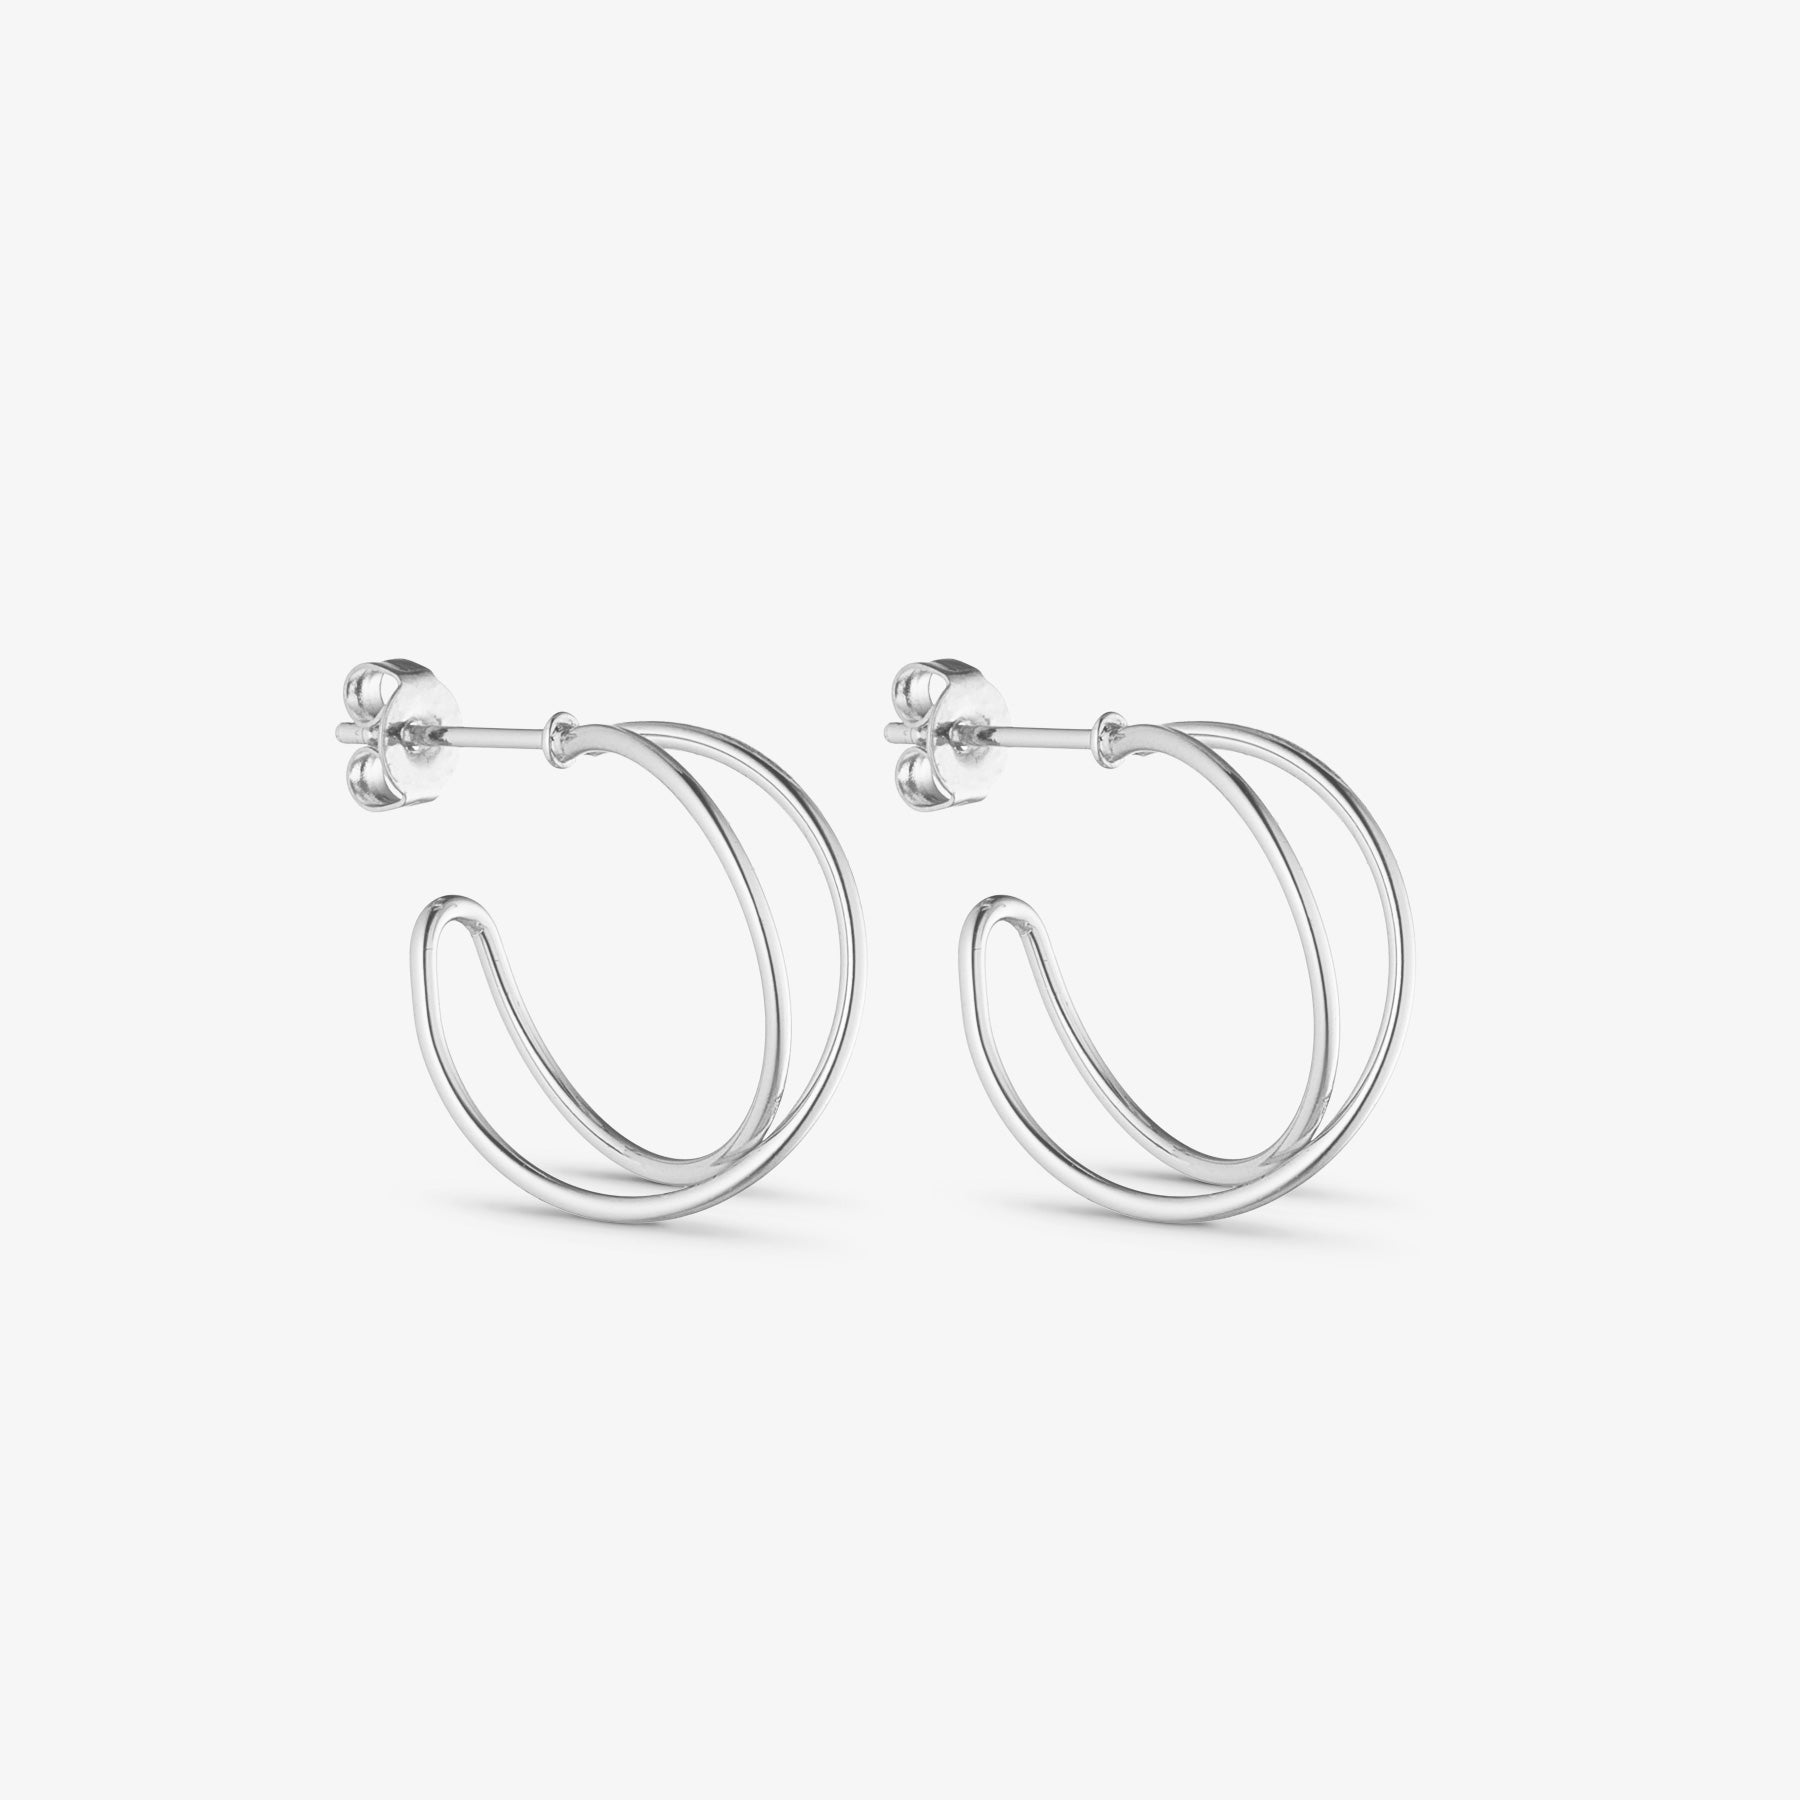 Mia Earrings SMALL - Silver plated